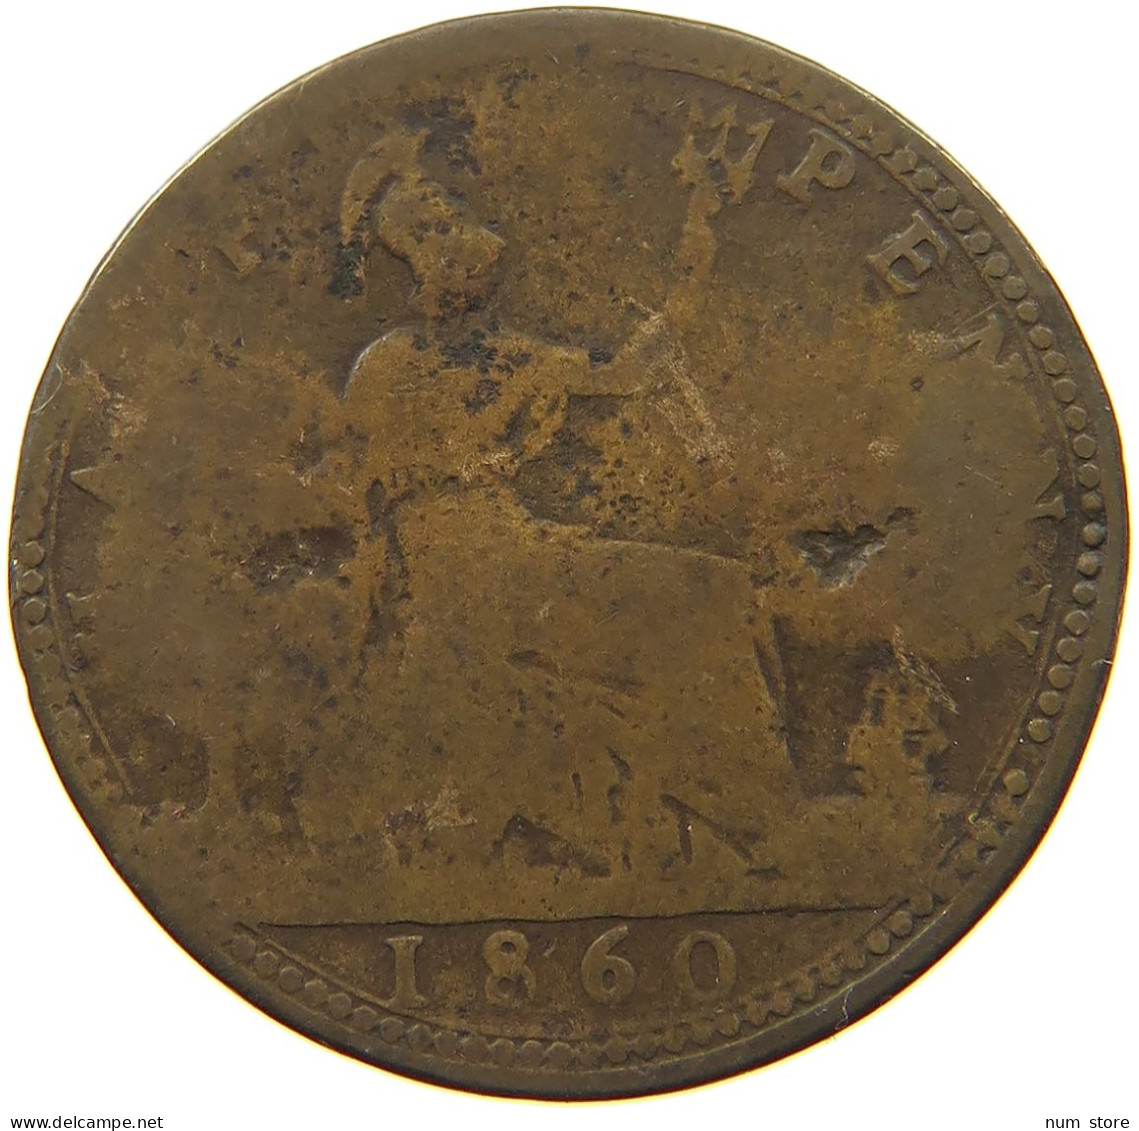 GREAT BRITAIN HALFPENNY 1860 Victoria 1837-1901 OVERSTRUCK FB #a036 0813 - C. 1/2 Penny